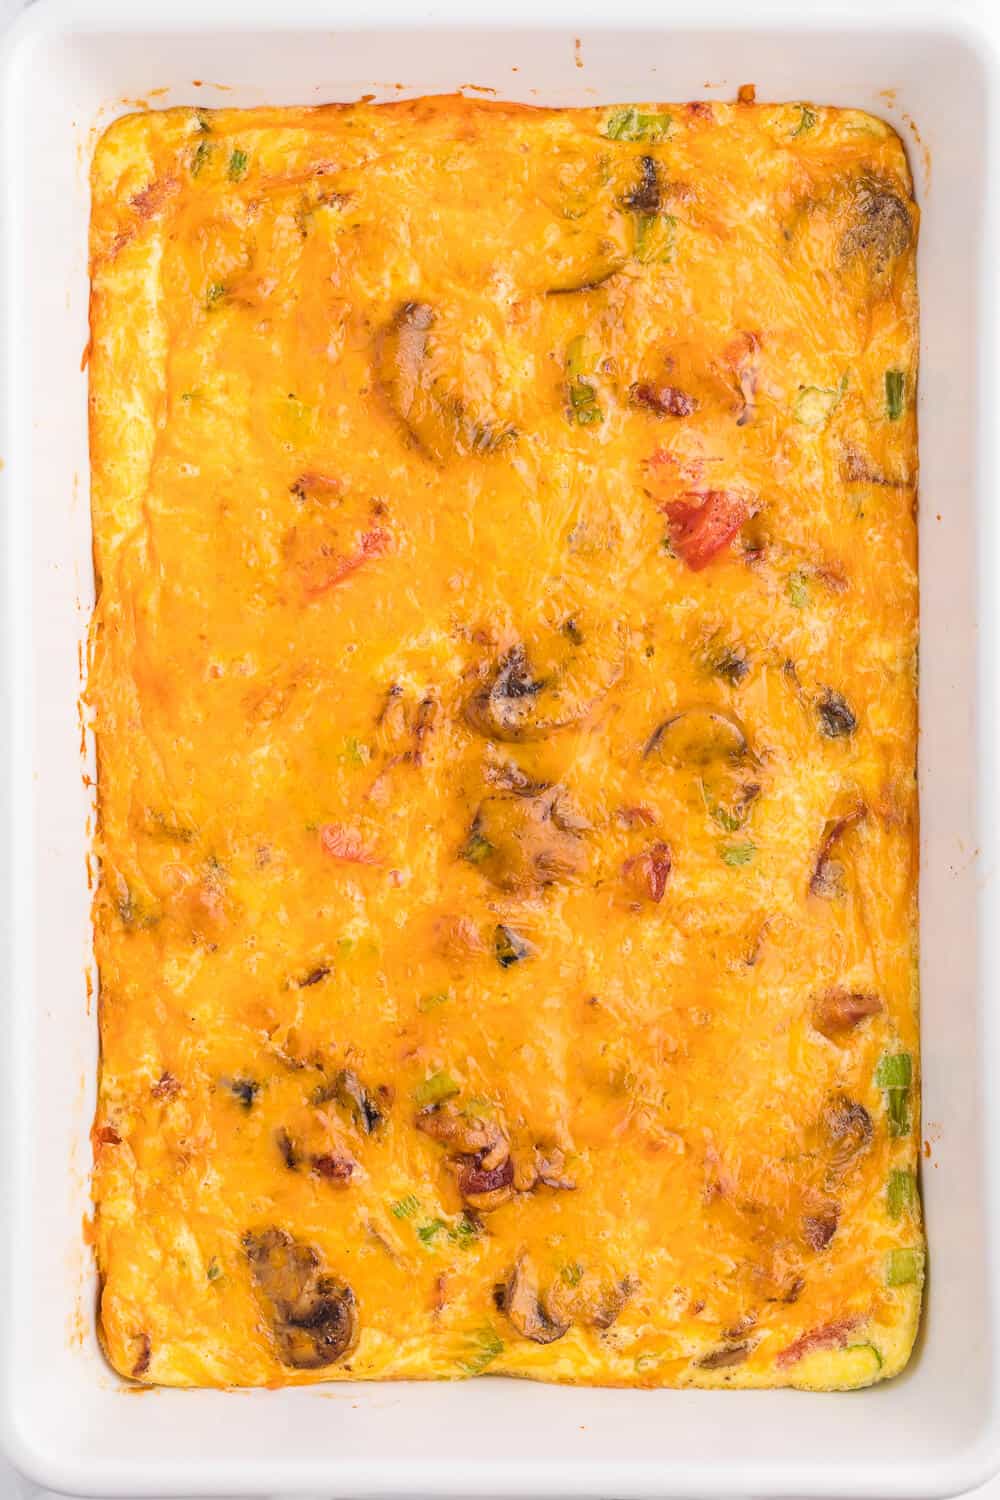 Crustless Bacon and Cheese Quiche - Rich, creamy eggs with bacon and cheese are a fantastic, lower carb option for brunch or dinner. Served with fruit or mixed greens, this is delicious and satisfying, no matter what time of day you make it!